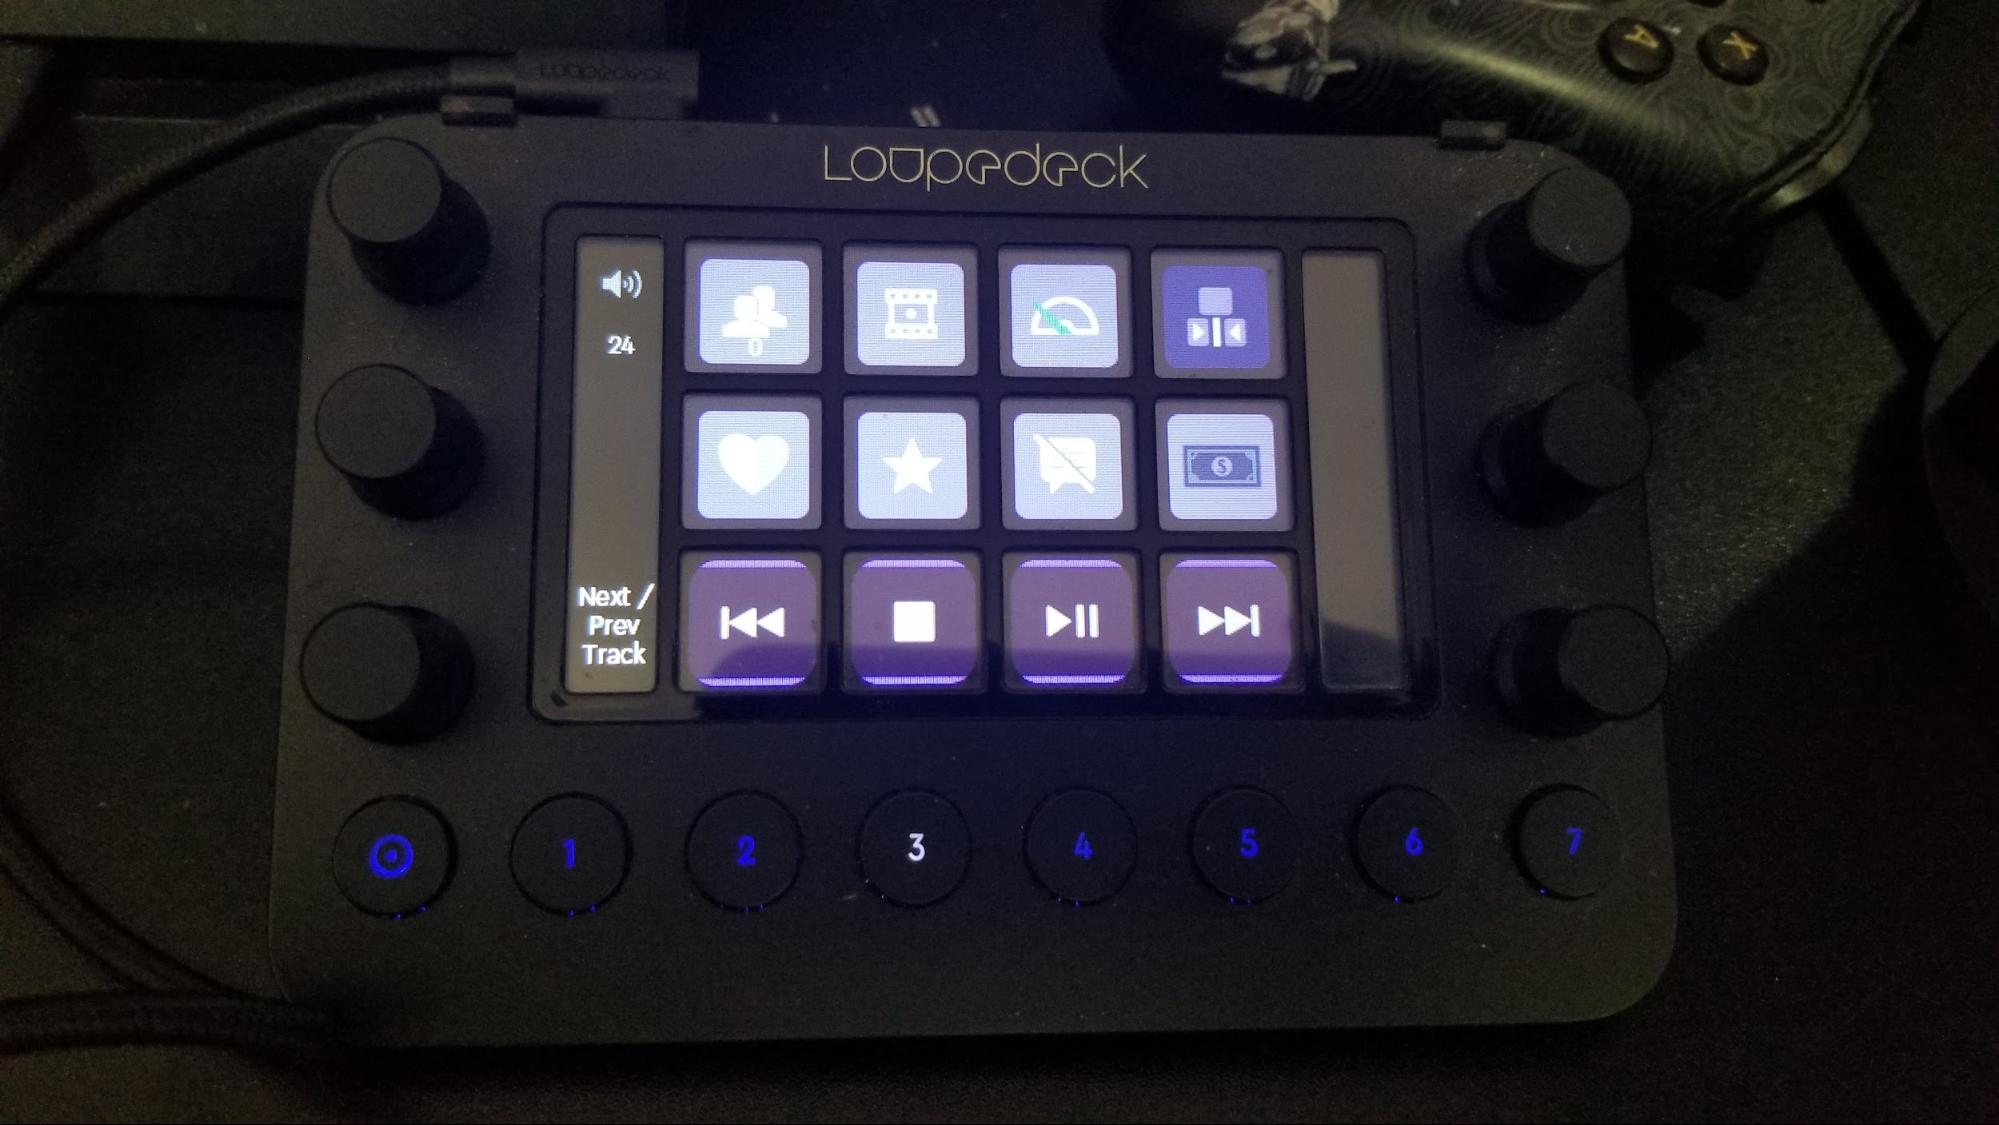 Loupedeck Live, Loupedeck CT, and Loupedeck+: Which Model Makes 